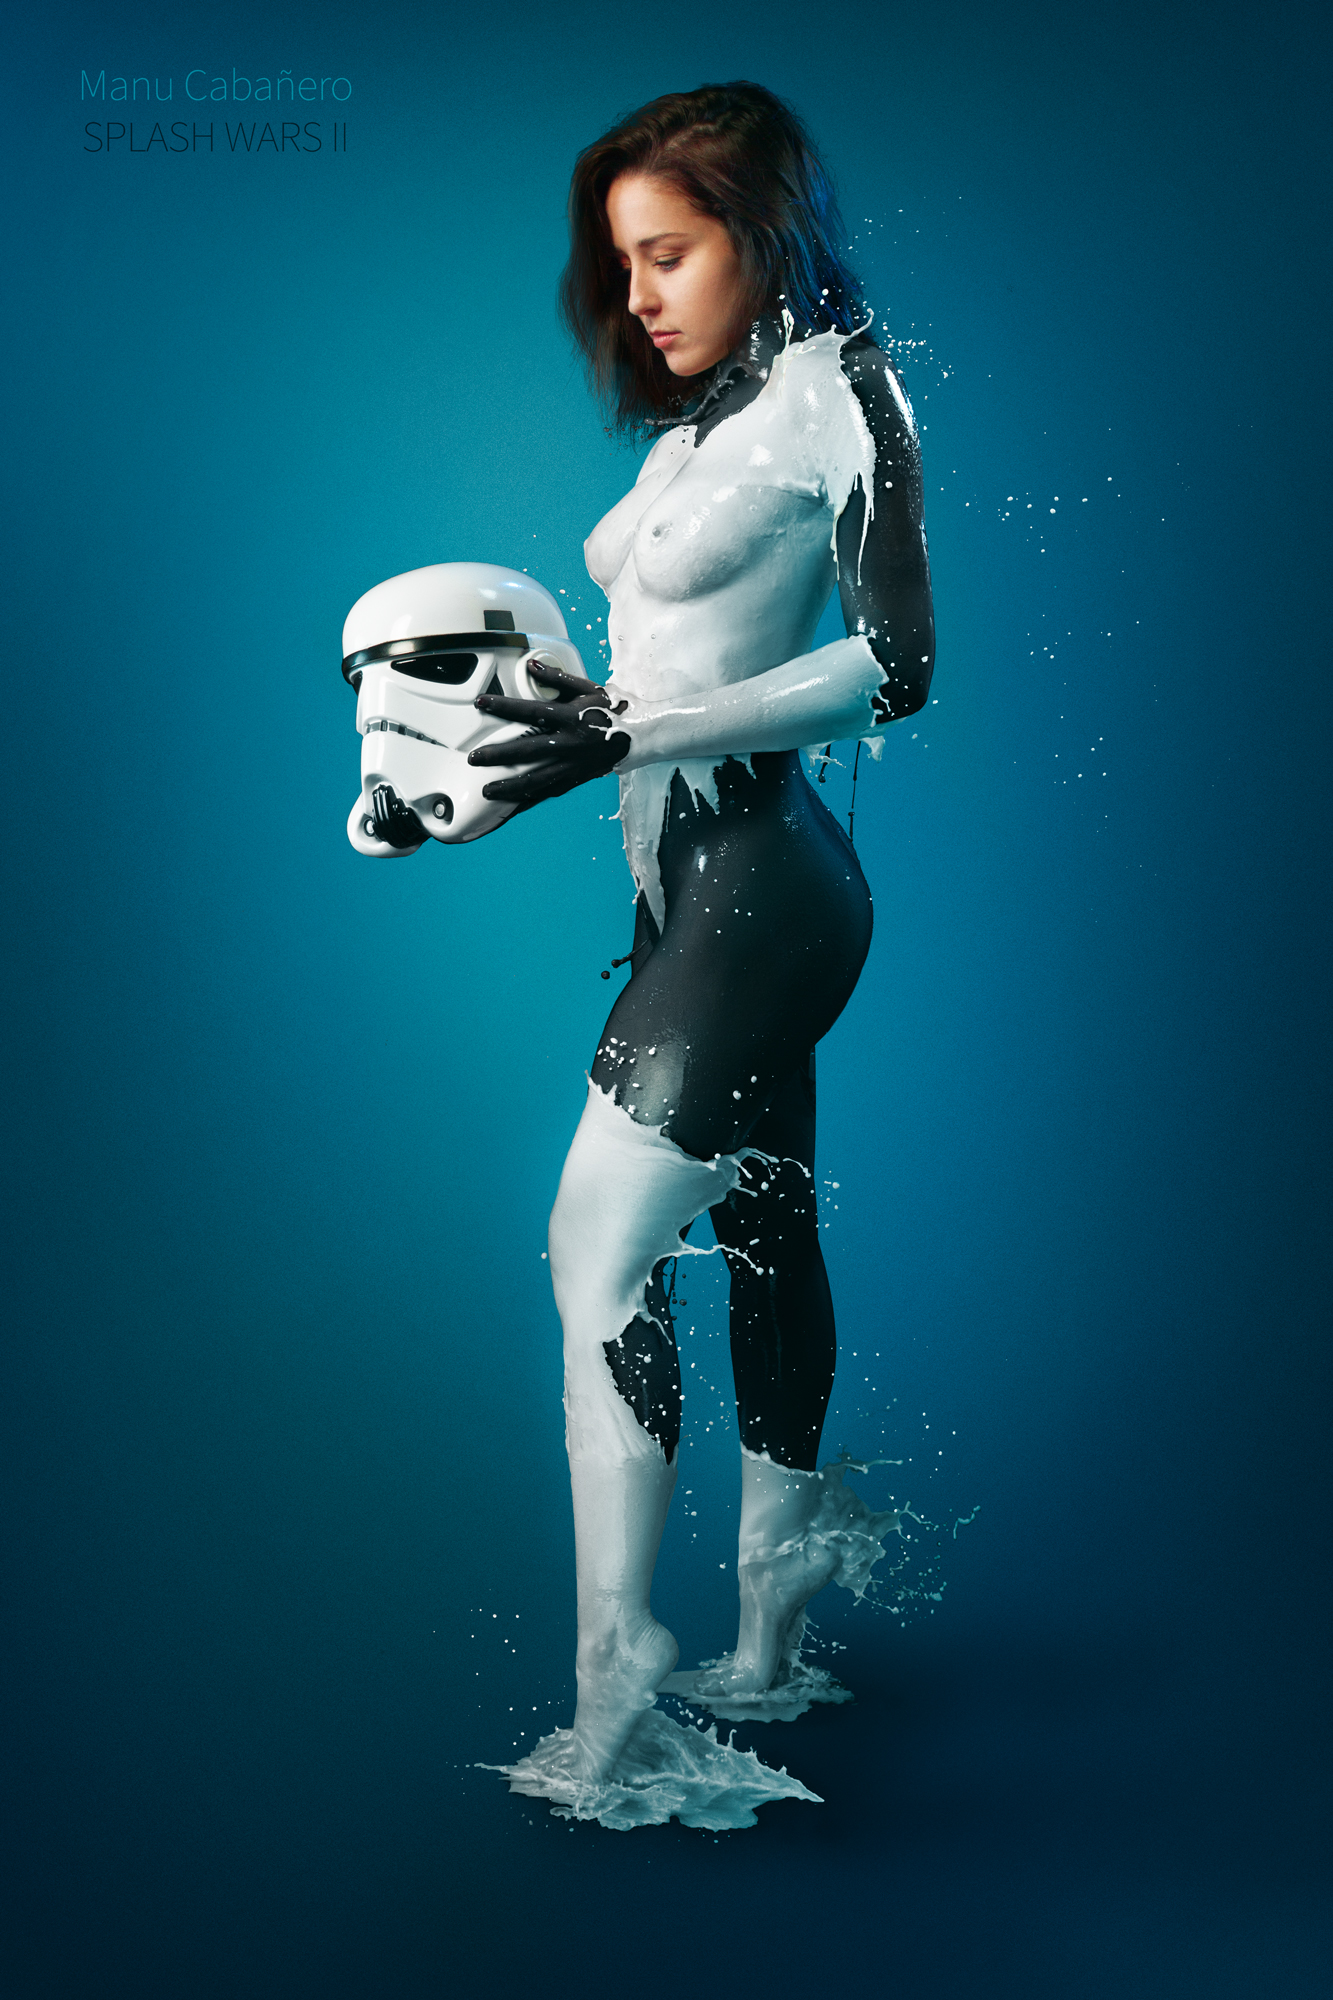 Manu Cabanero's Splash Wars II Continues to Pay Homage to Star Wars (NSFW)